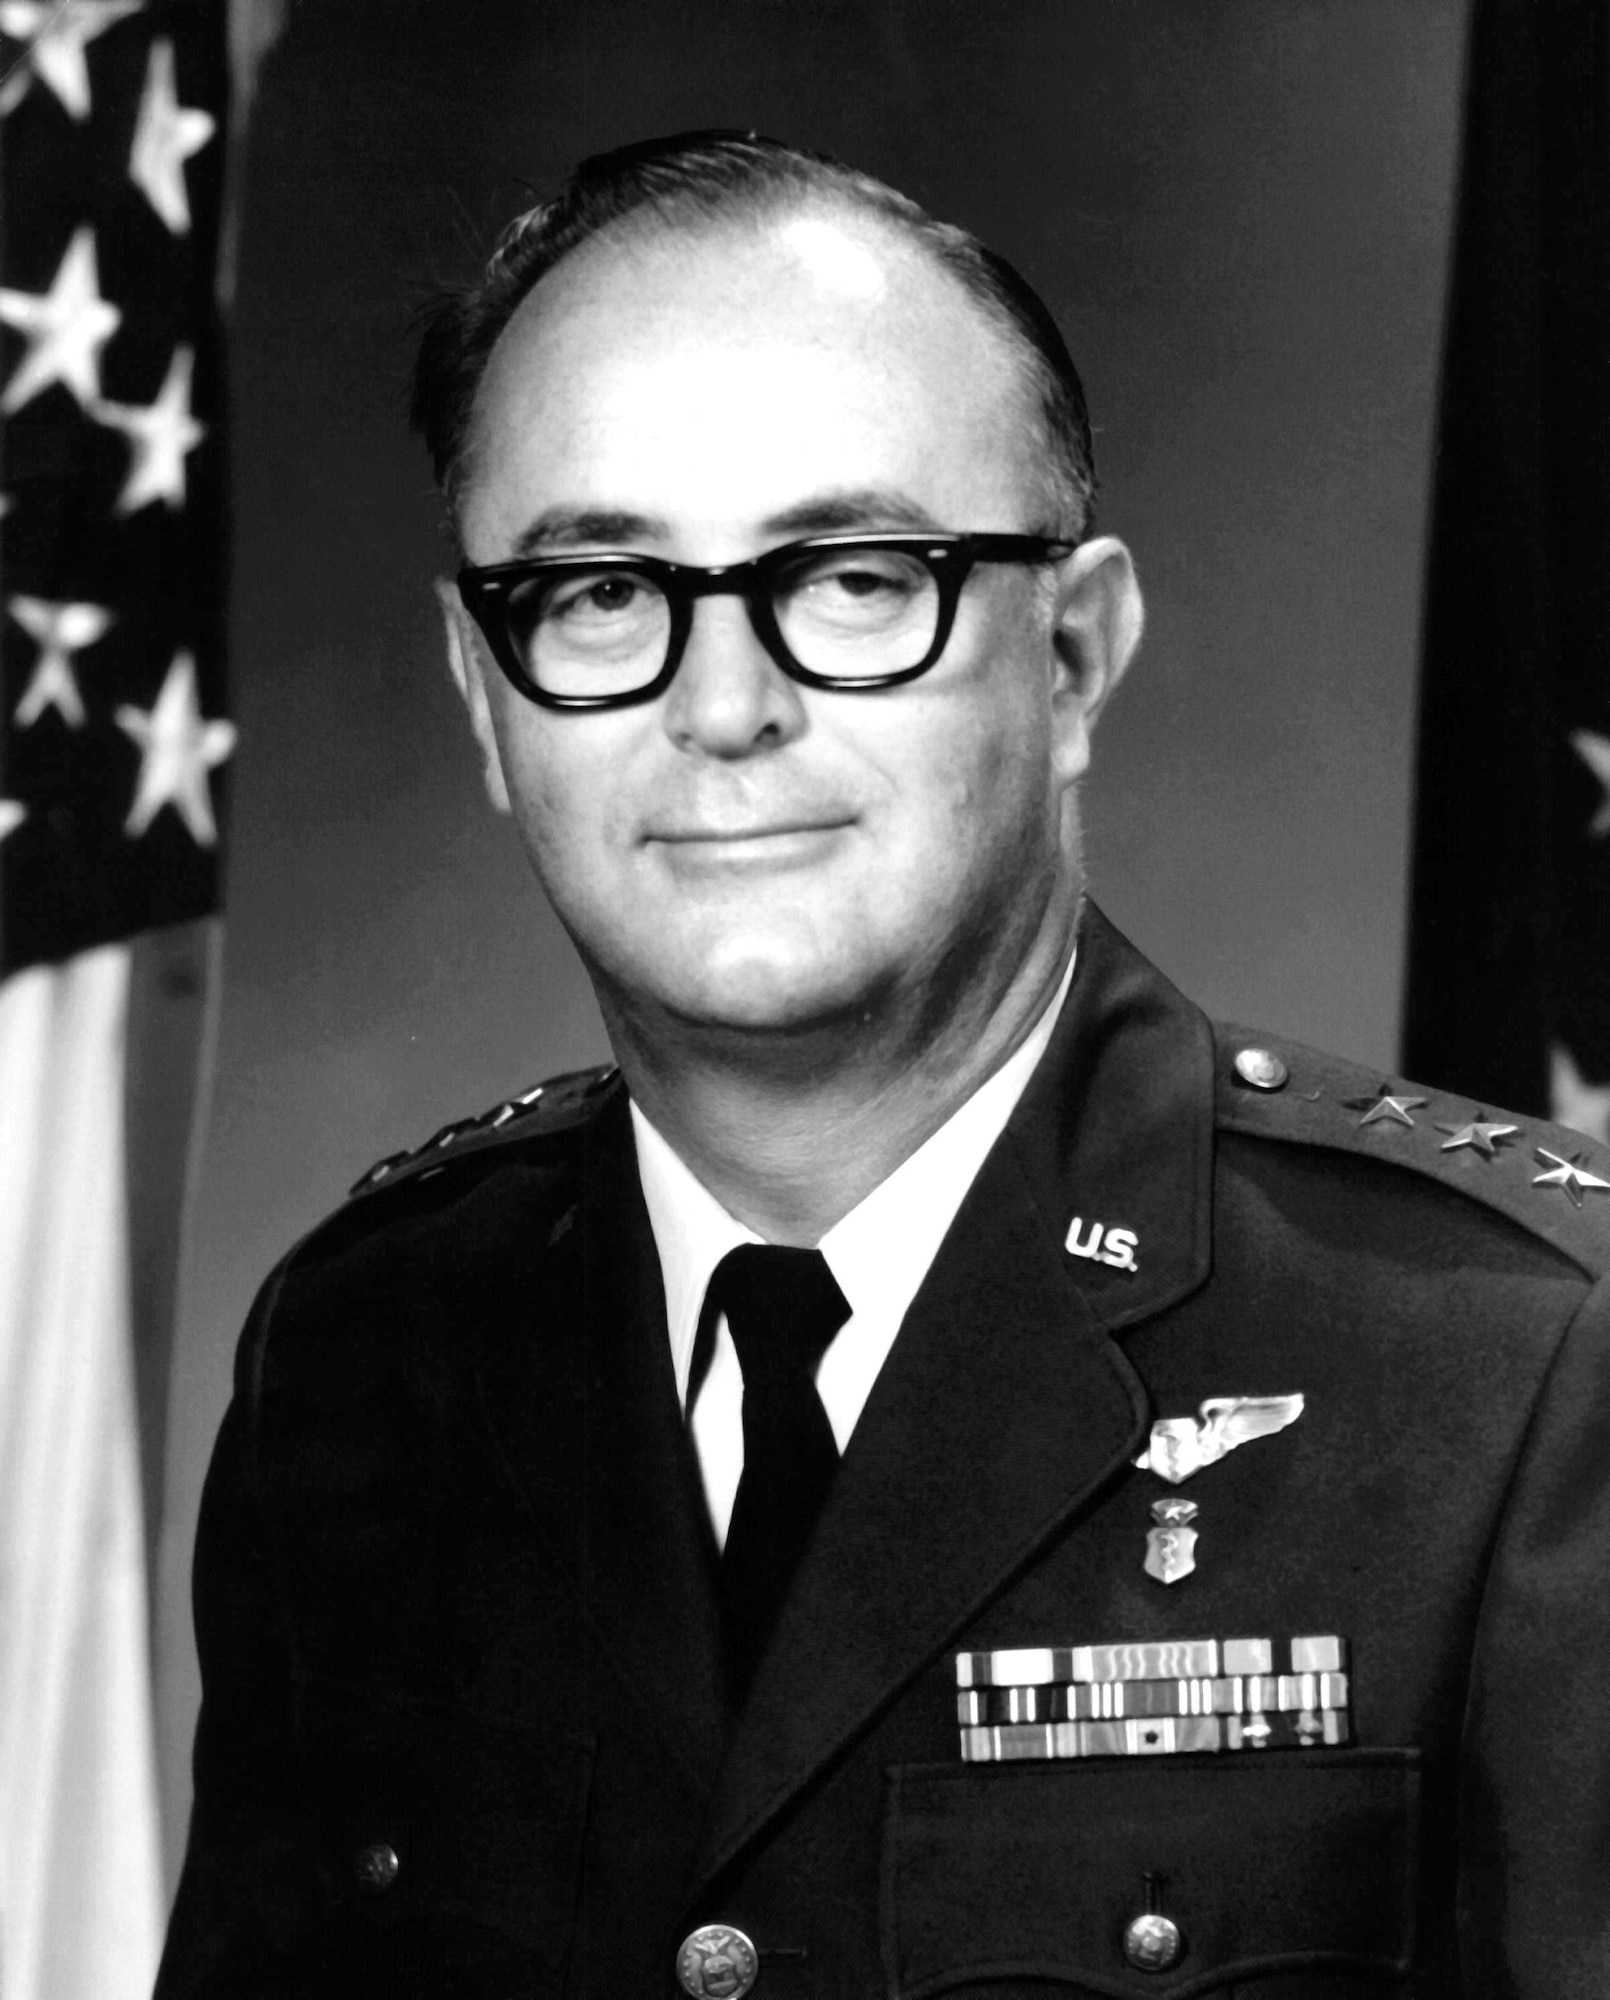 Retired Lt. Gen. (Dr.) Paul W. Myers, former Air Force Surgeon General, passed away of natural causes on Nov. 25, 2013 in San Antonio, Texas. (DoD Photo)